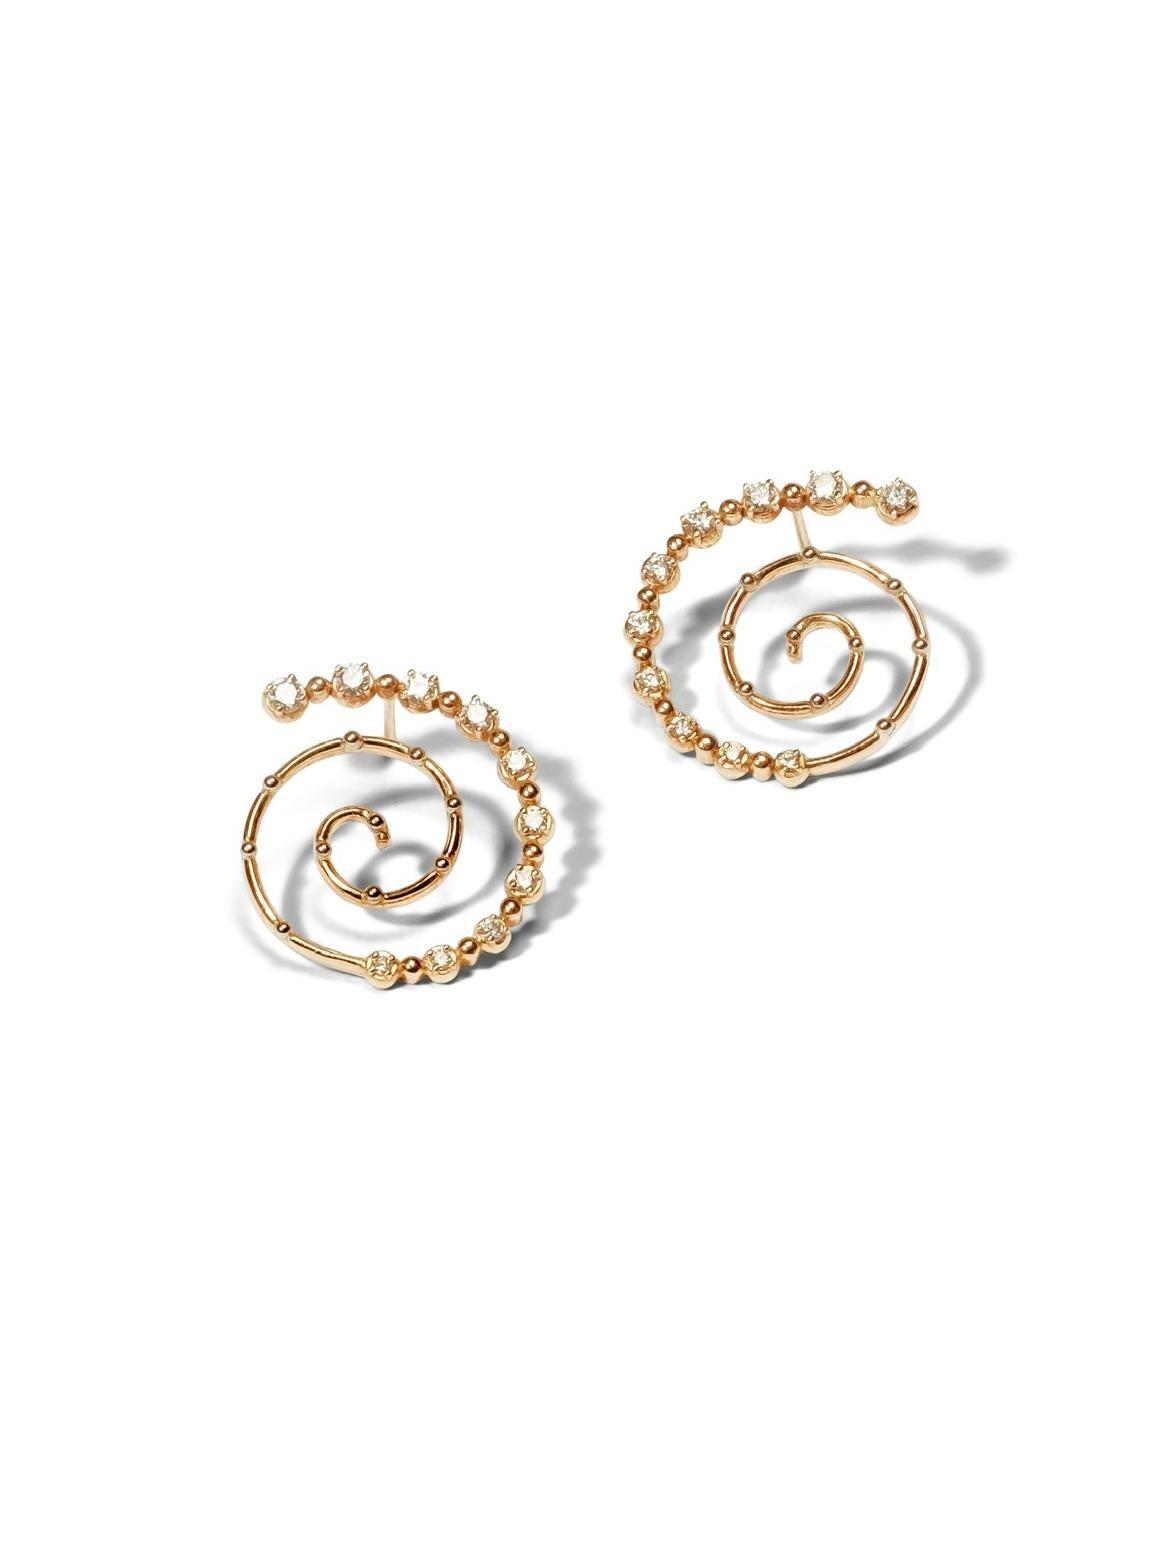 More spirals, please. A refreshing twist on the classic gold hoop earring making it a must have pair. Featuring diamonds and gold beads along the spiral. This pair will stylishly take you from work-from-home video calls to dinner with your